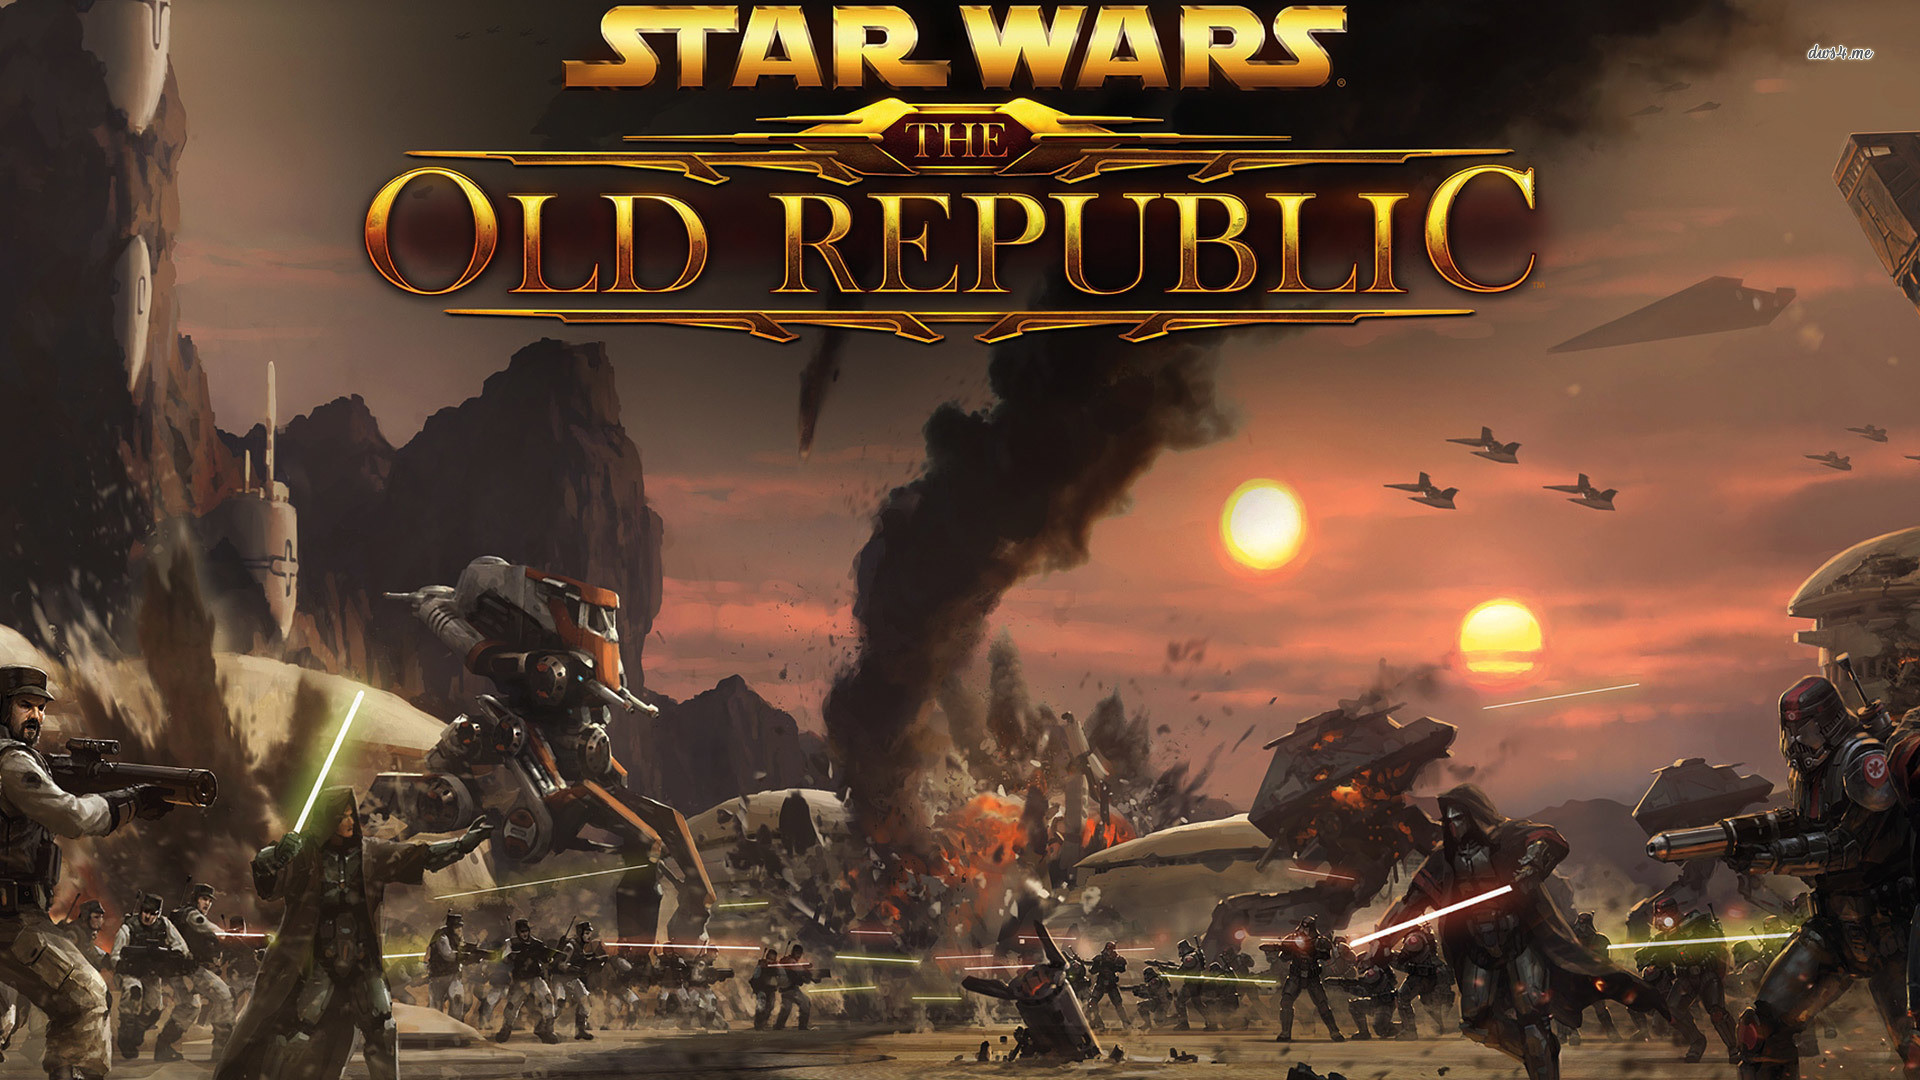 1920x1080 File: Star Wars The Old Republic Wallpapers 100% Quality HD.jpg | Janell